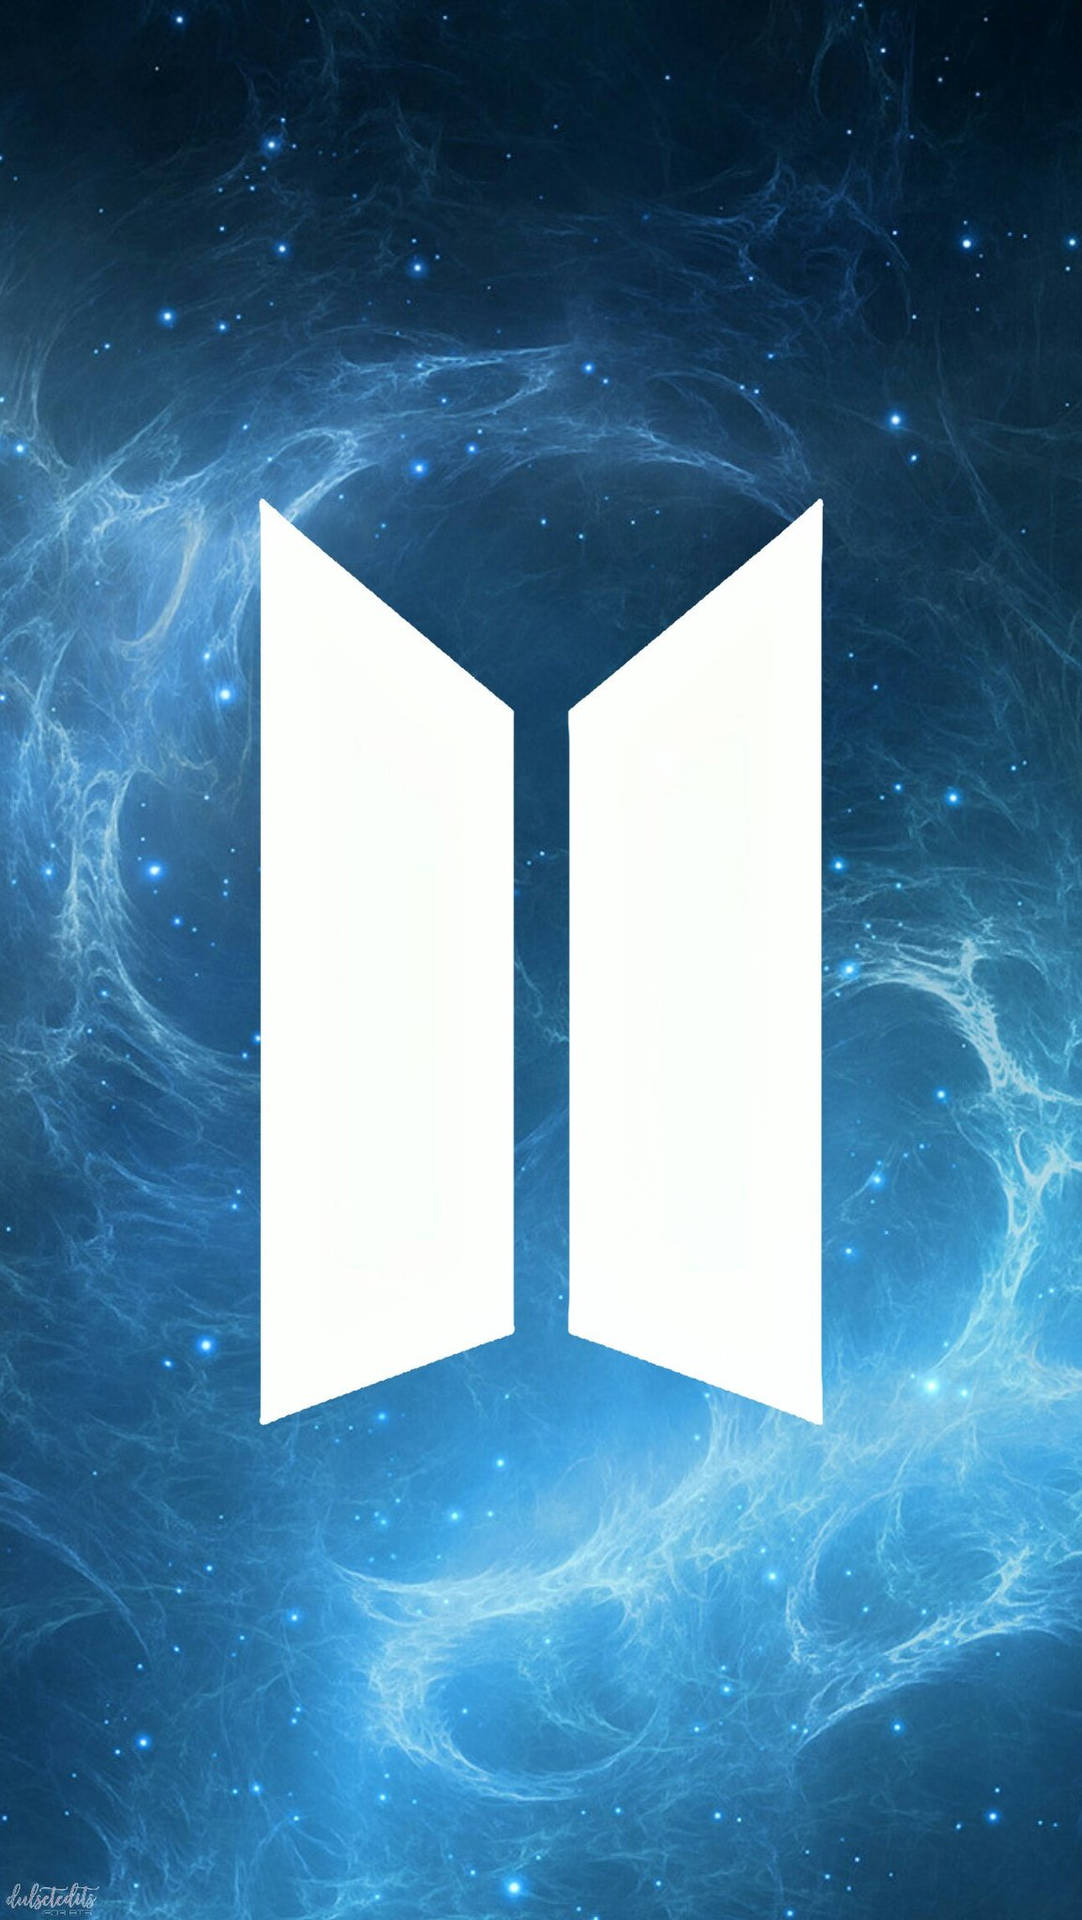 Bts Logo In Blue Picture